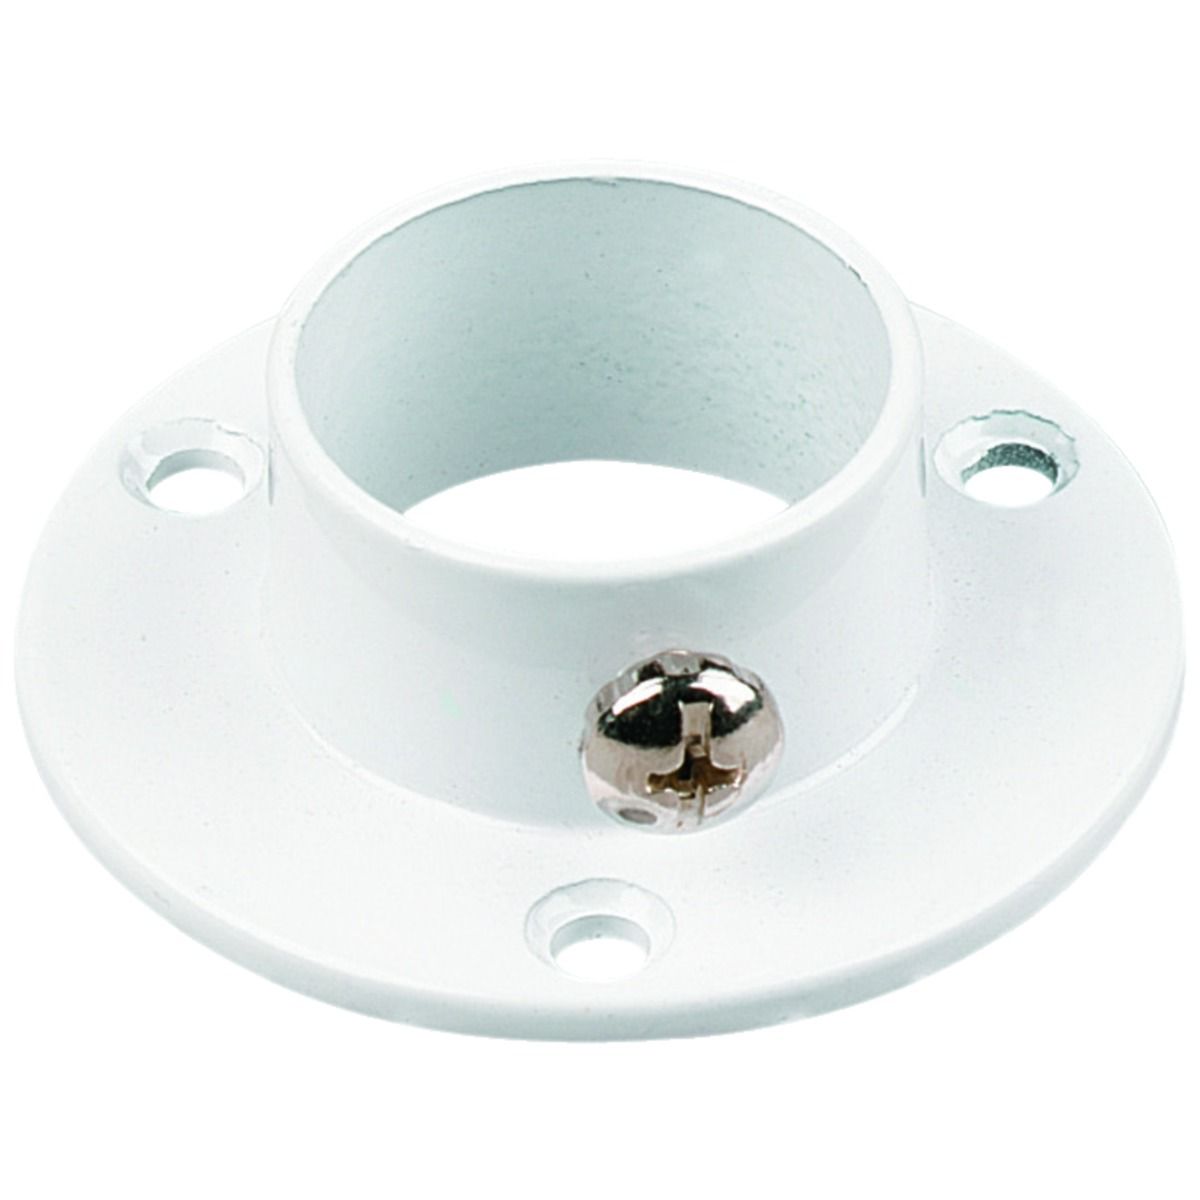 Image of Wickes Interior Wardrobe Rail Super Deluxe Socket - 25mm White Pack of 2